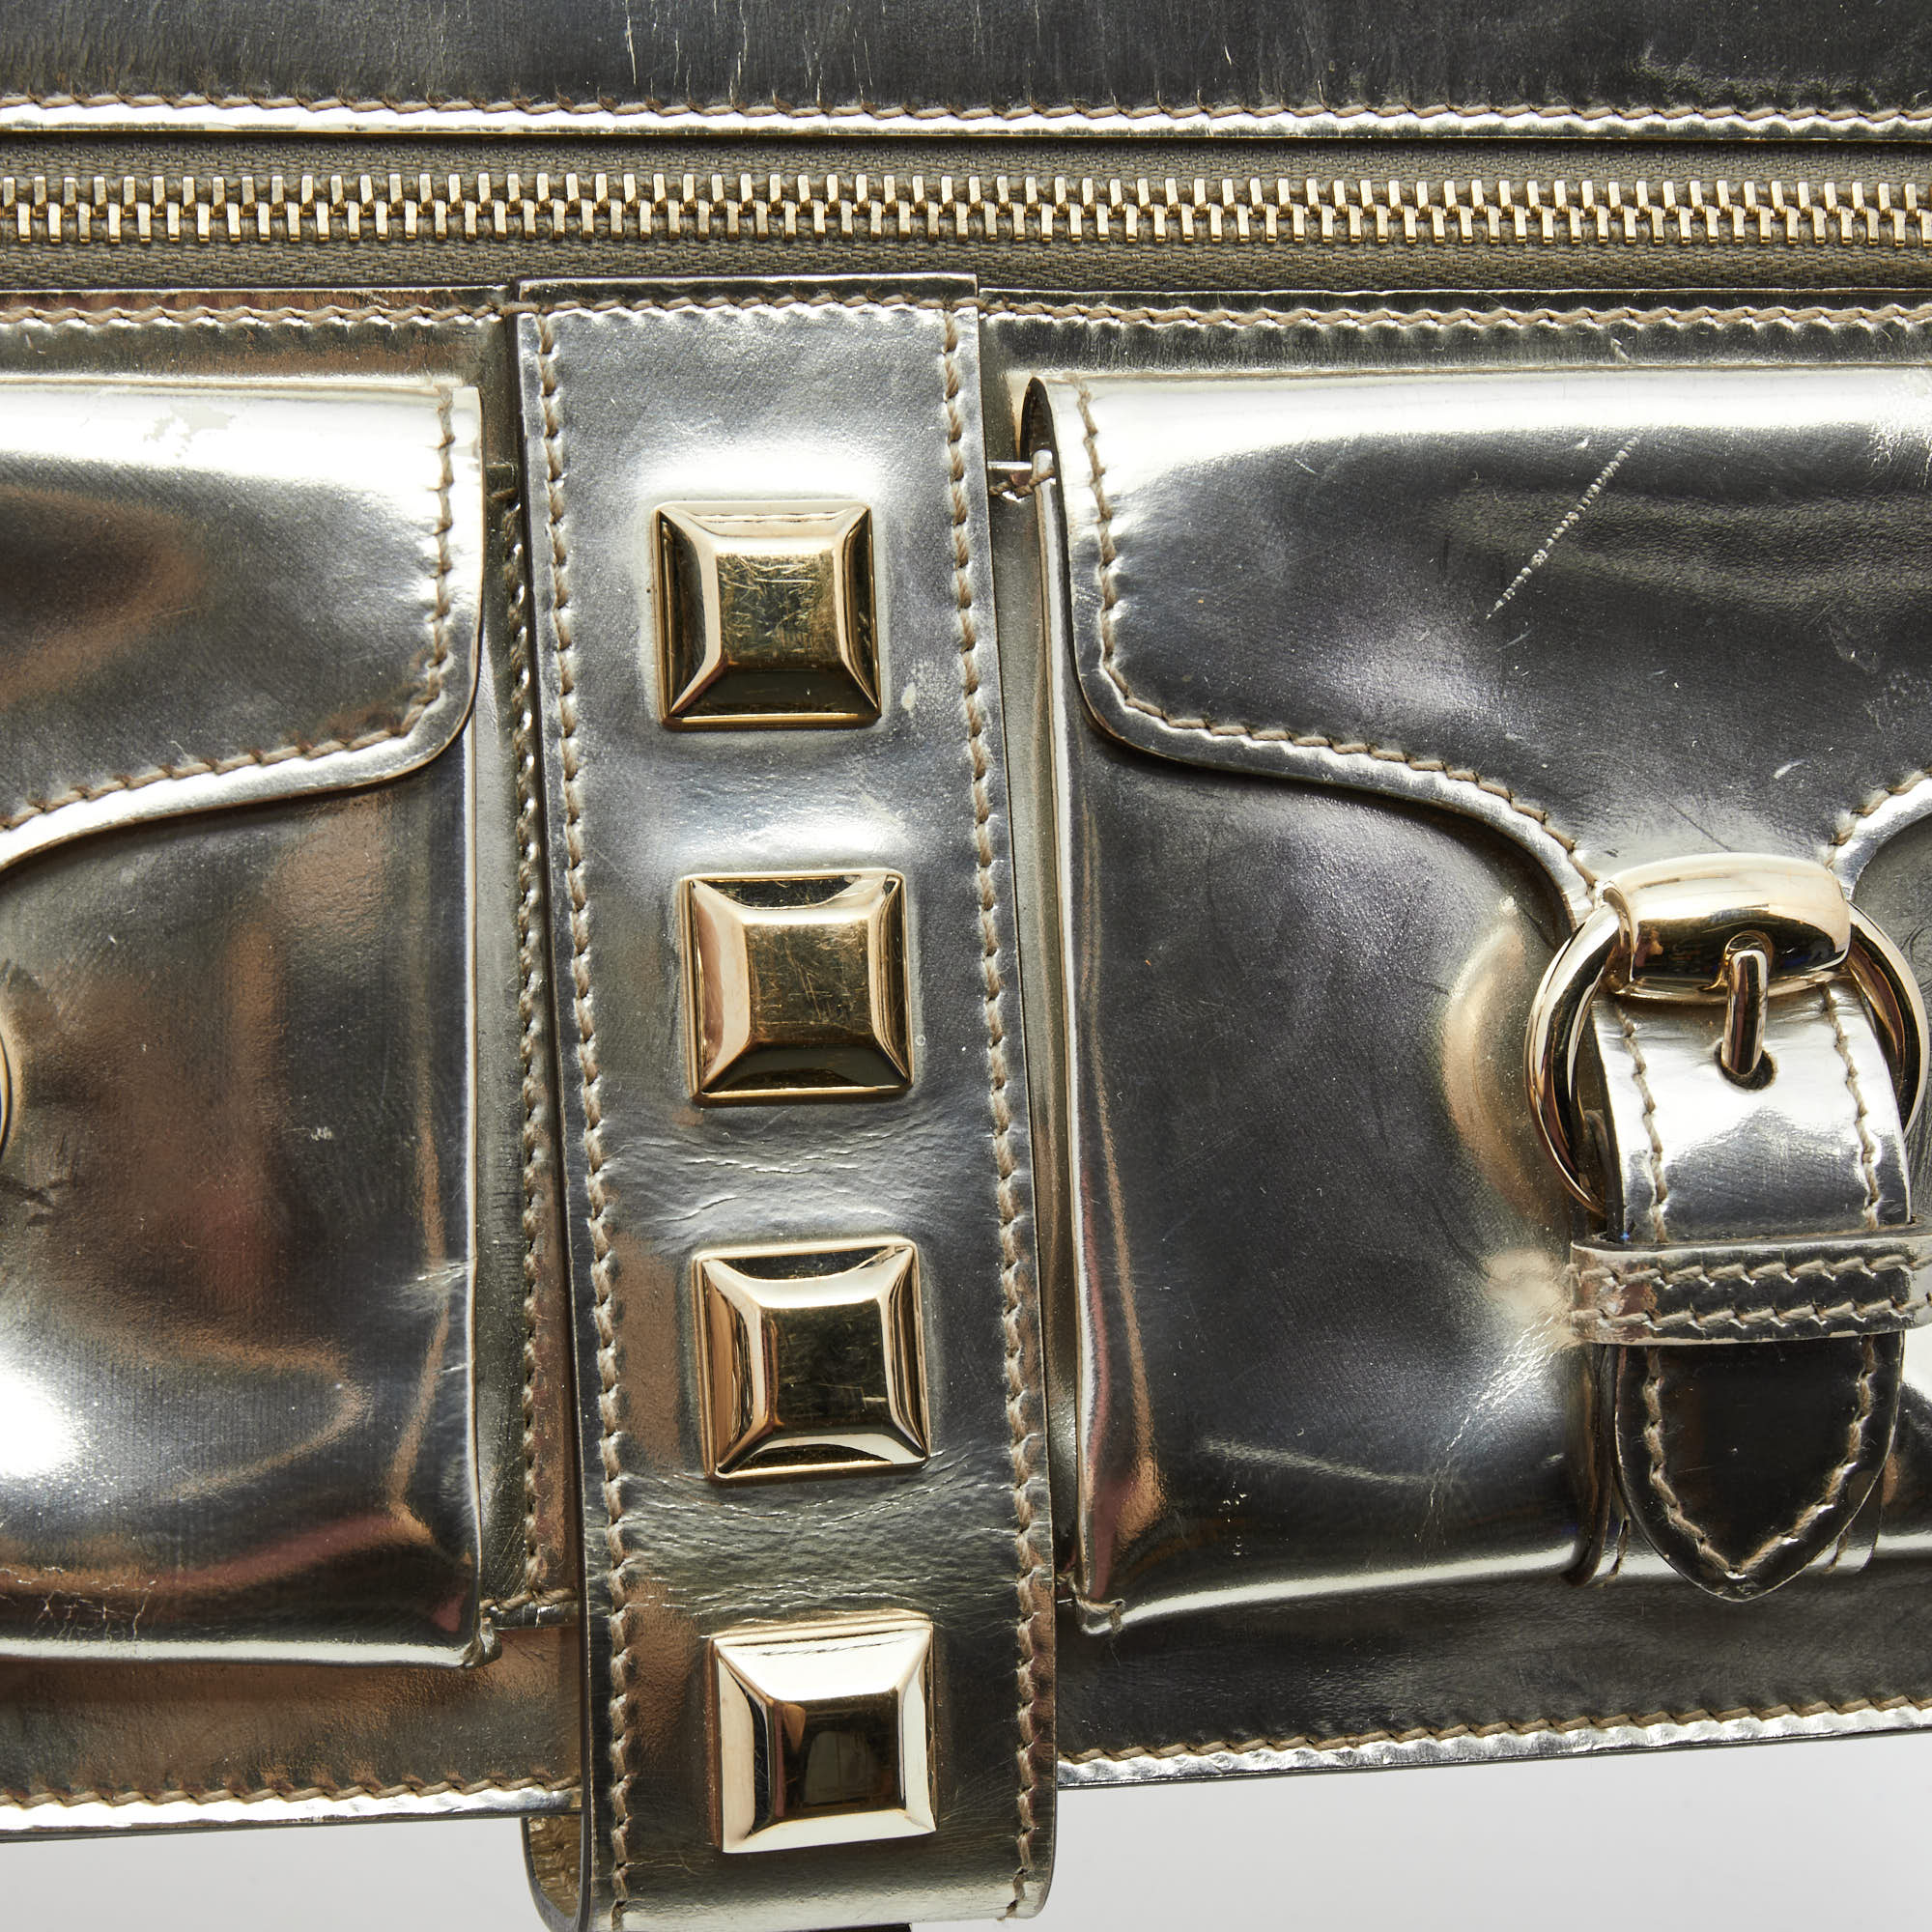 Gucci Metallic Gold Laminate Leather Studded Evening Wristlet Clutch